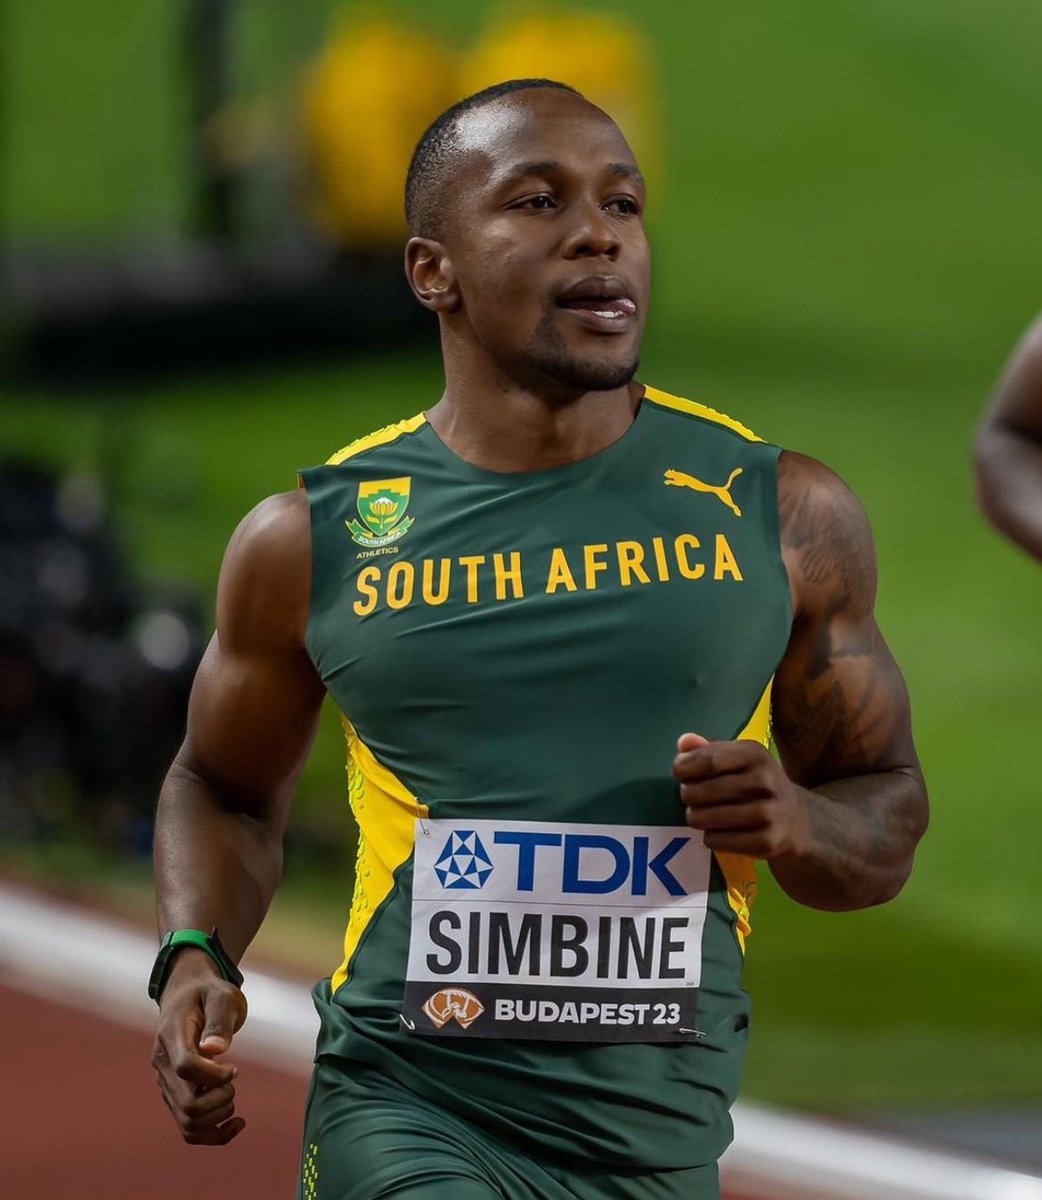 ‼️ WORLD LEAD ‼️ 9.90s

Akani Simbine 🇿🇦 storms to a World Lead of 9.90s (-0.4) to win the Men’s 100m at the Adidas Atlanta City Games